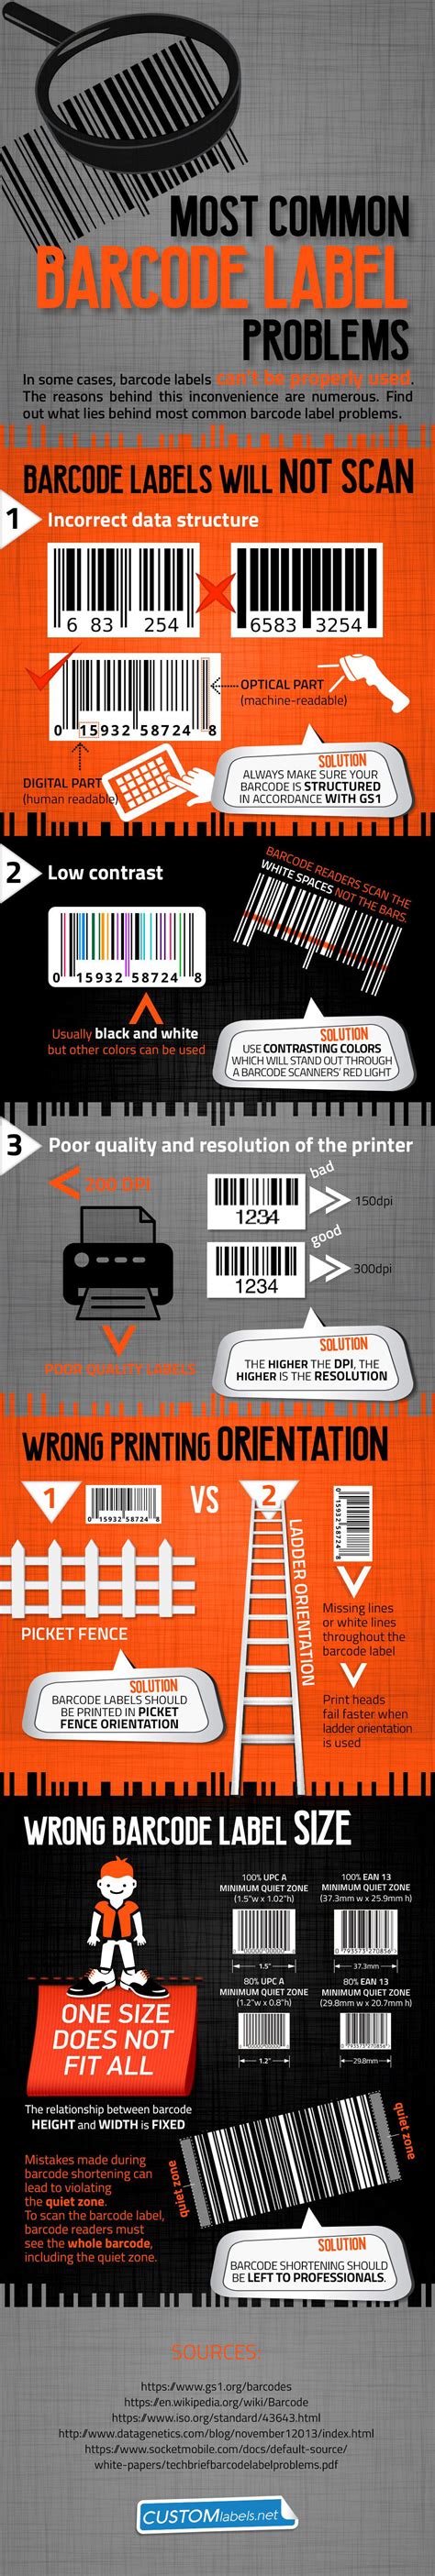 common barcode label problems infographic portal